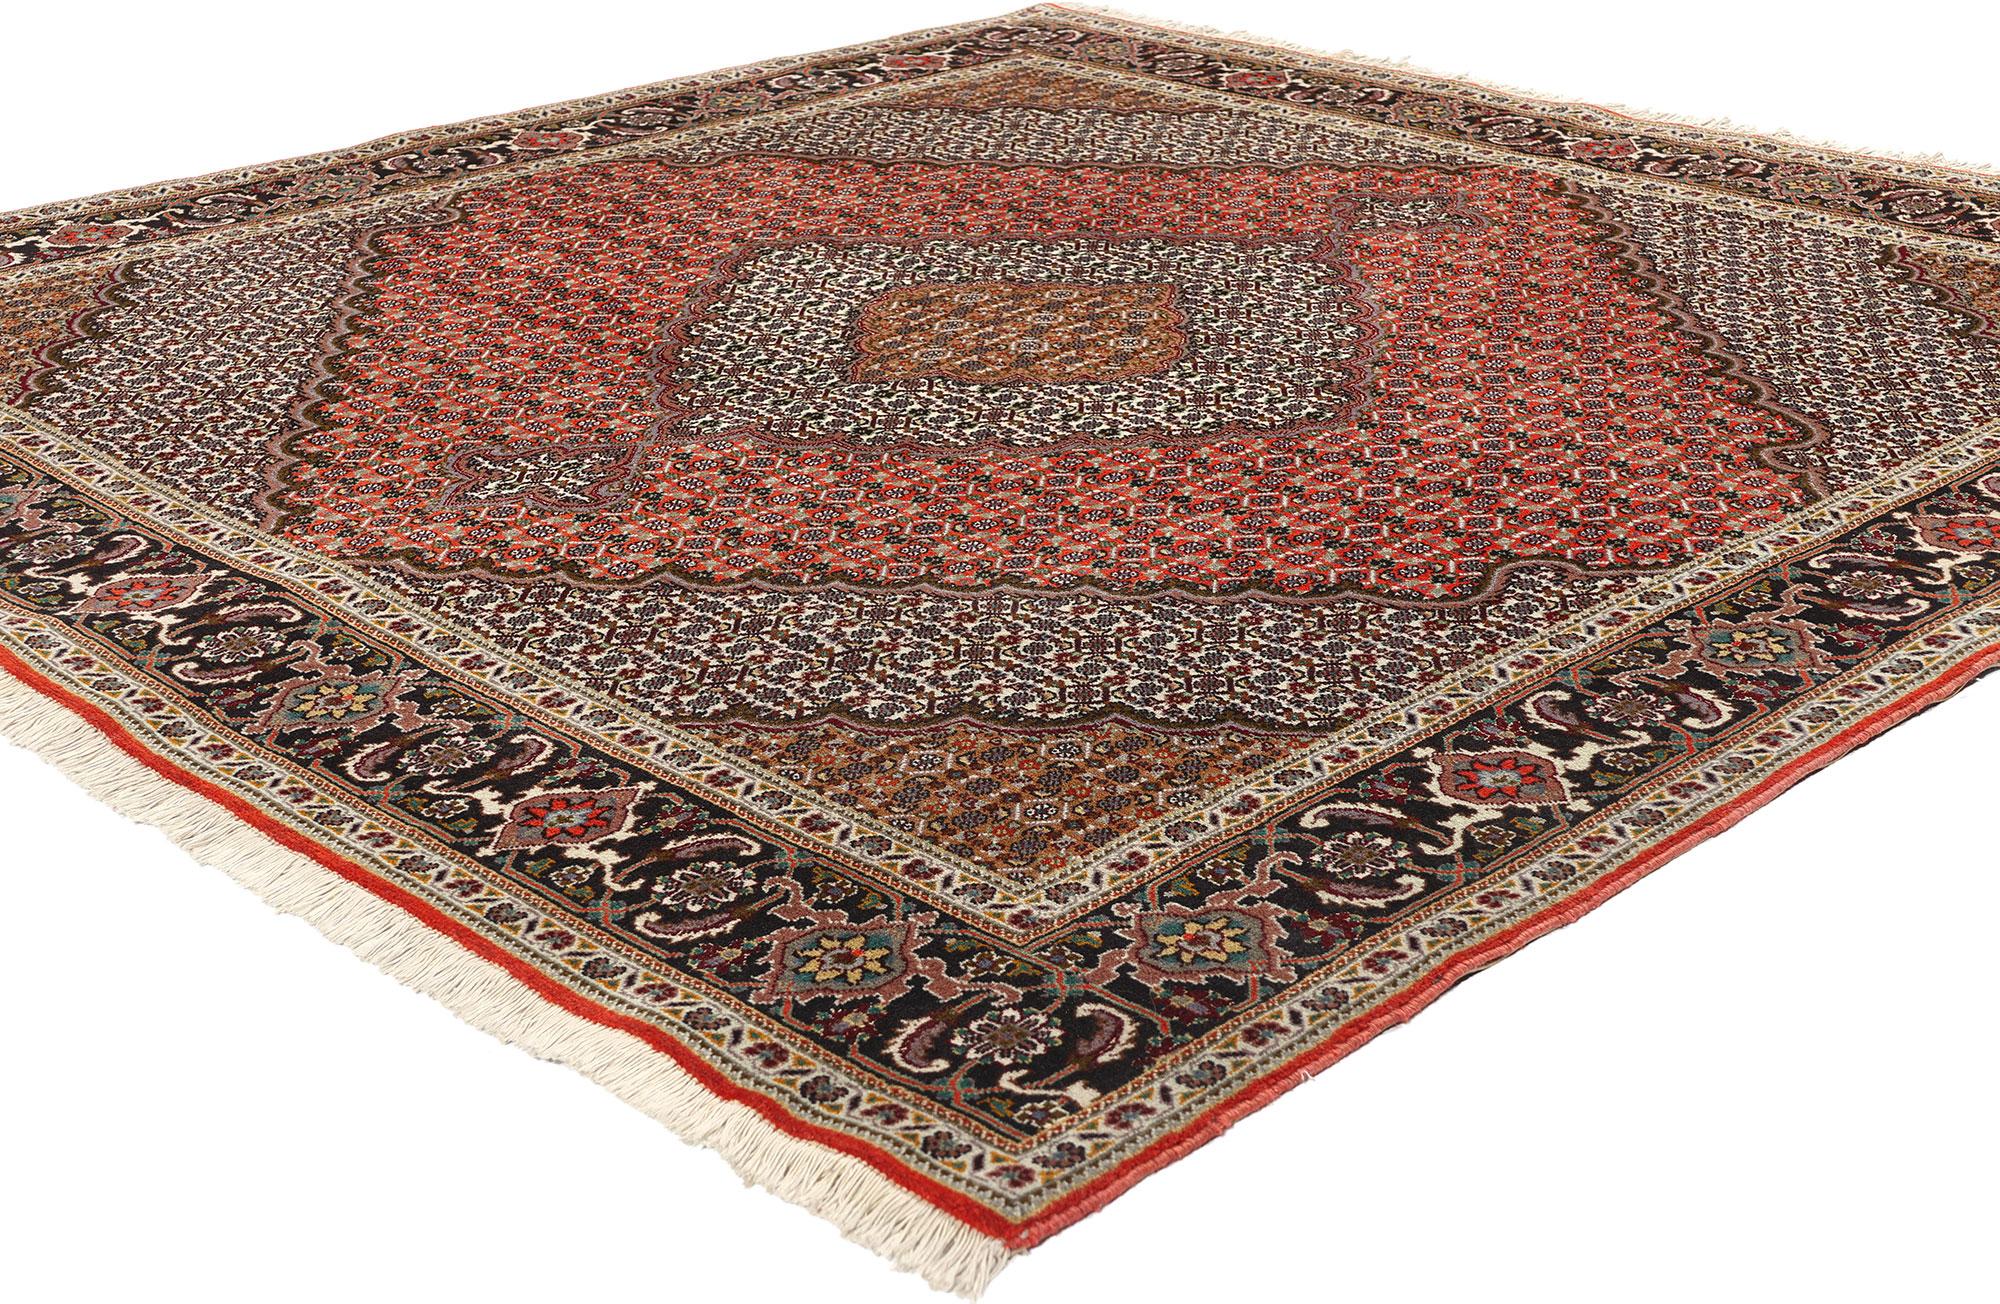 78781 Square Vintage Persian Mahi Tabriz Rug, 06'08 x 06'09. Nestled amidst the majestic Sahand Evnali mountains in Azerbaijan, Iran, lies the captivating Quru Valley, housing the alluring city of Tabriz. Revered for its exquisite handcrafted